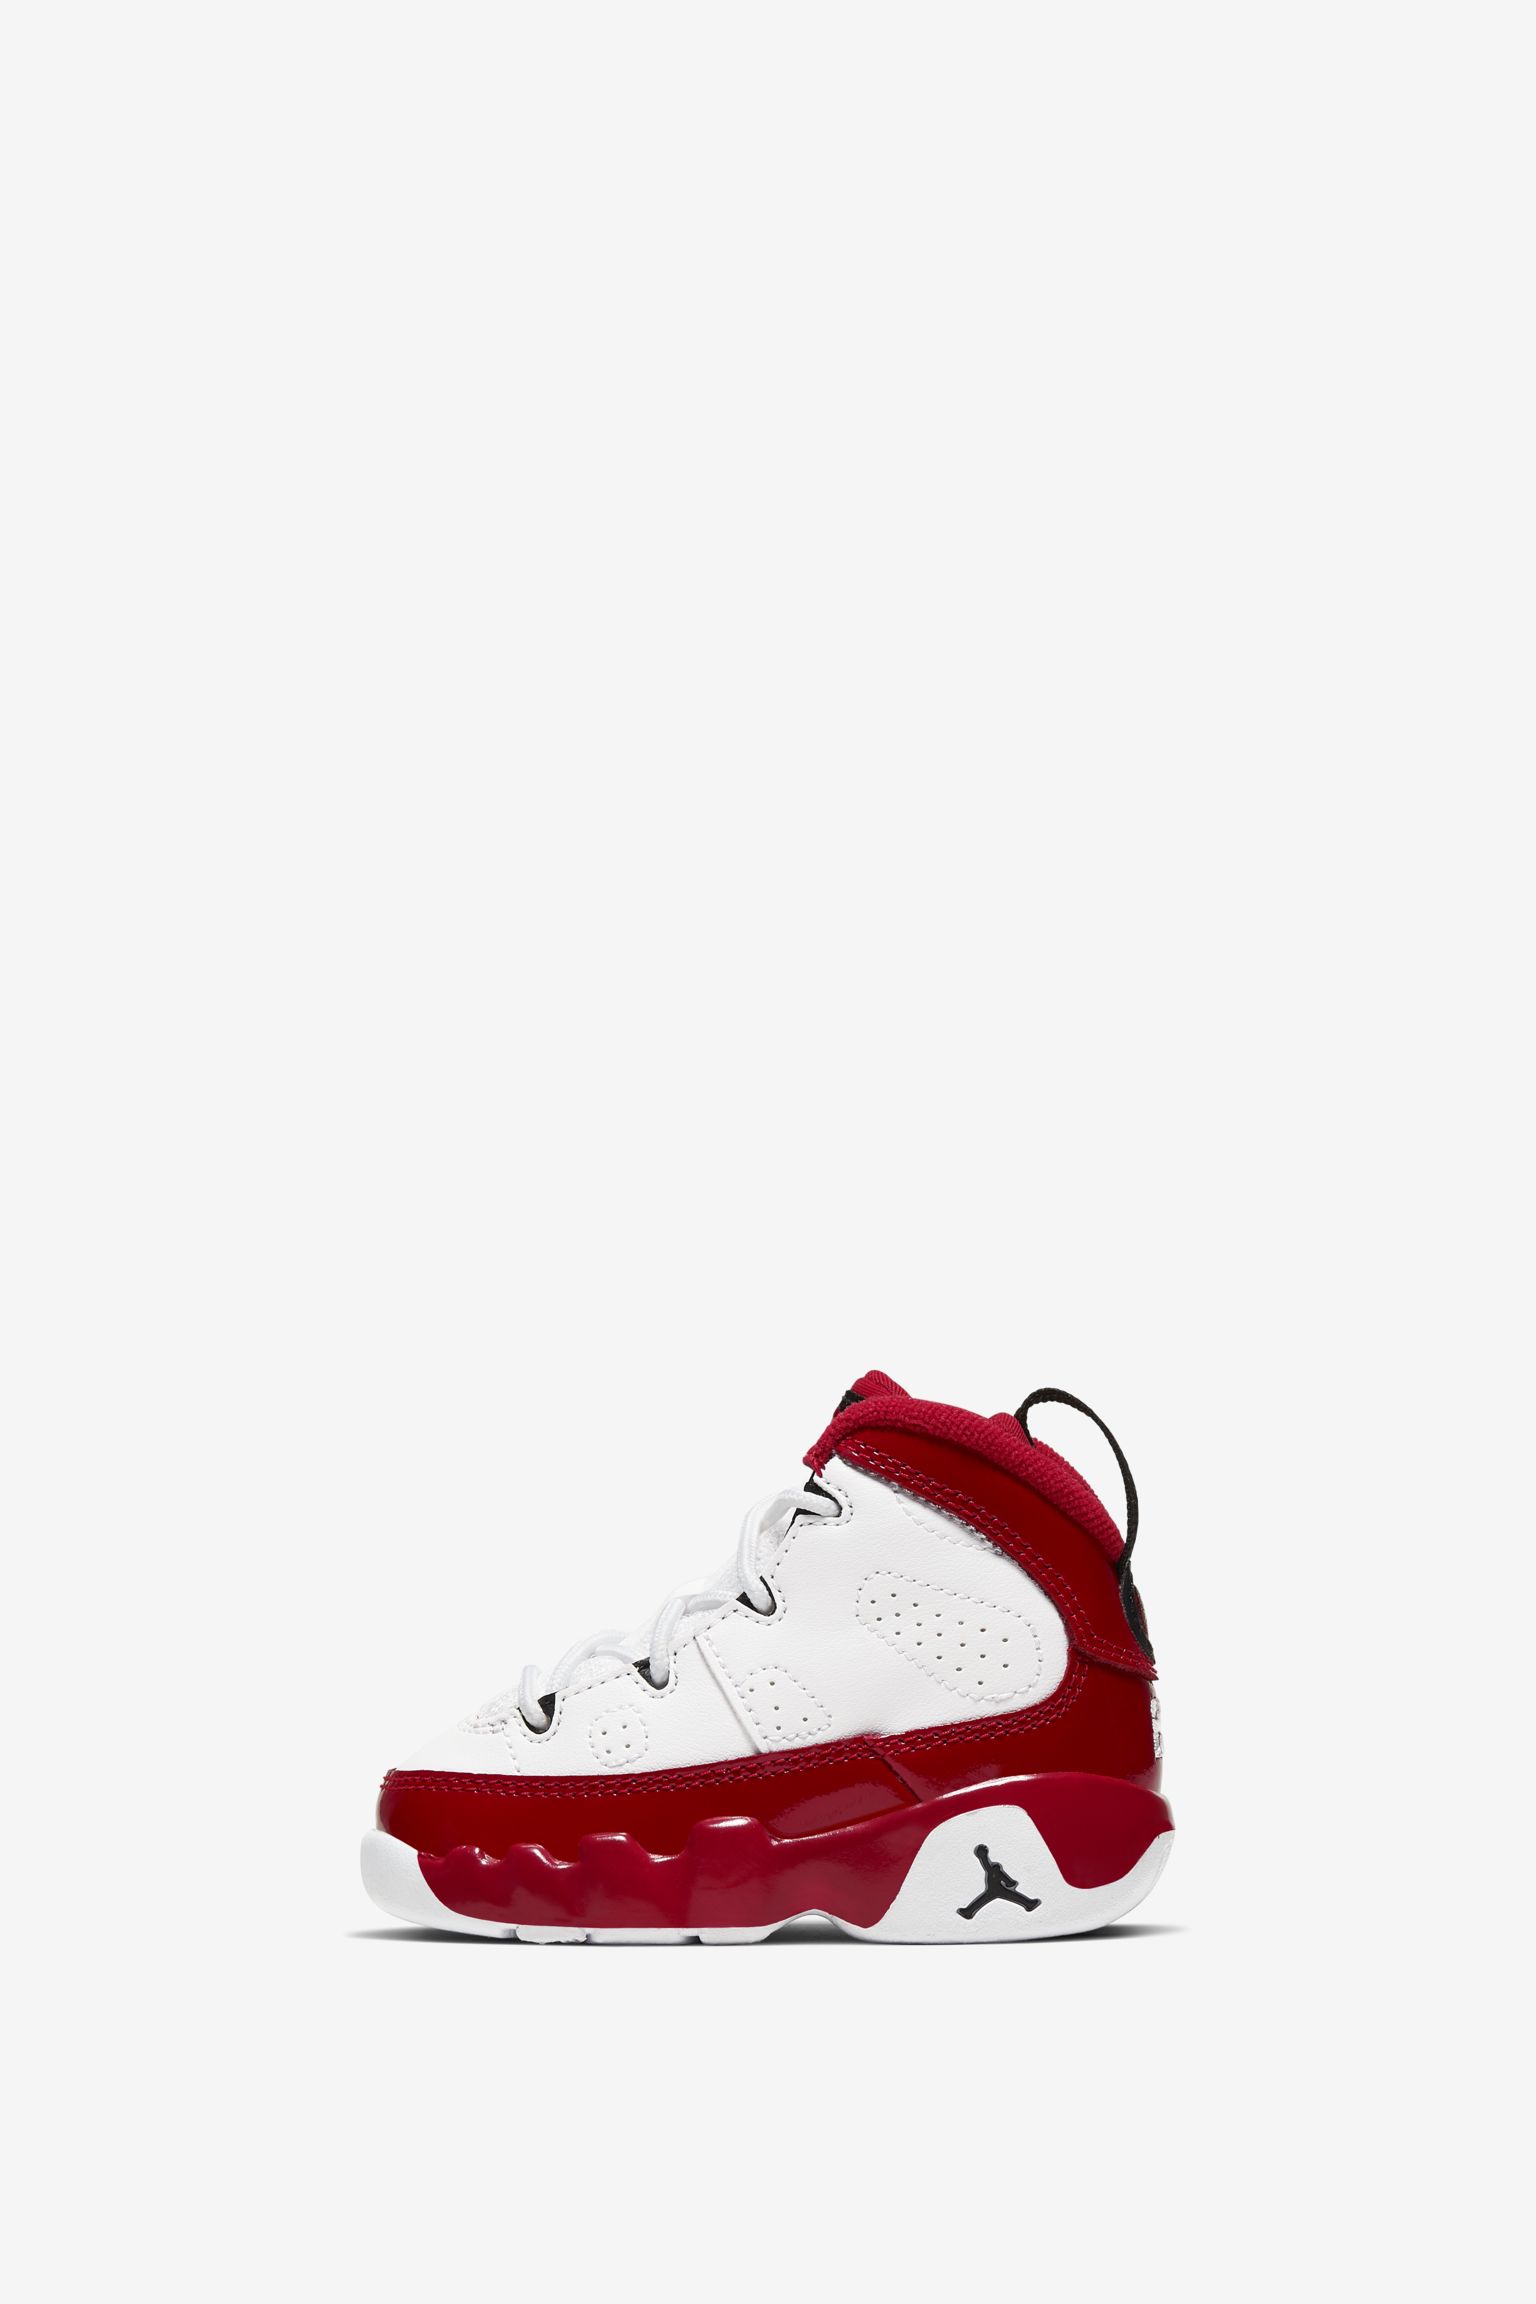 jordan 9s white and red